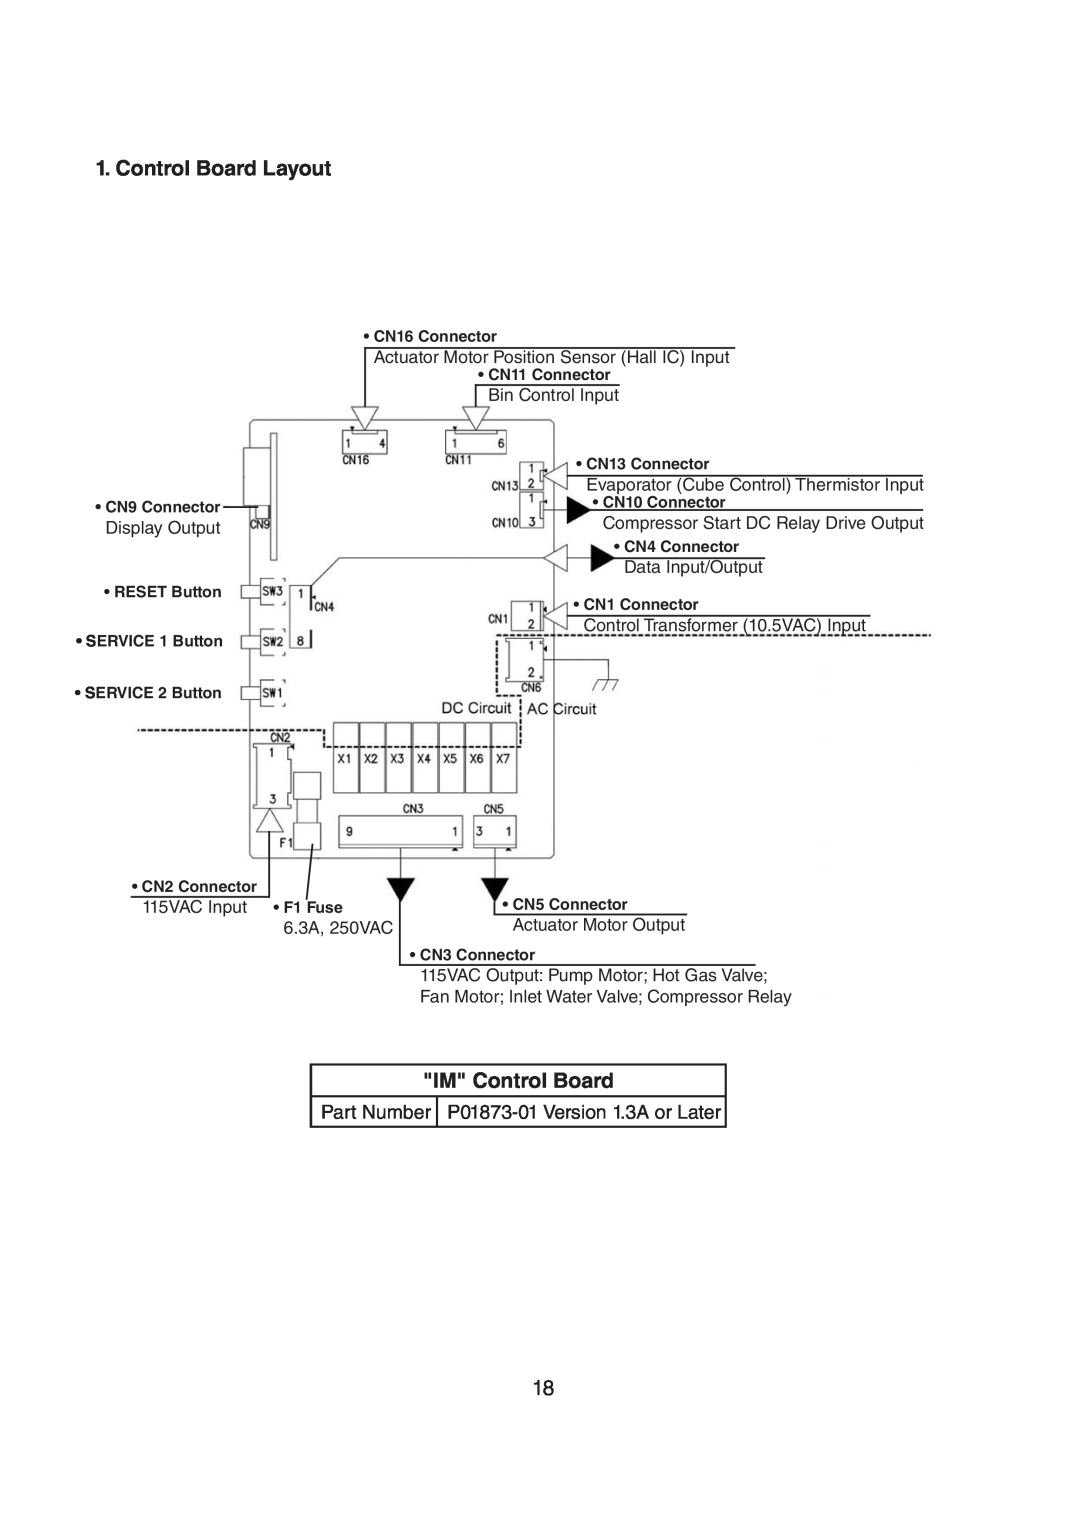 Hoshizaki M029-897 service manual Control Board Layout, IM Control Board, Part Number P01873-01 Version 1.3A or Later 